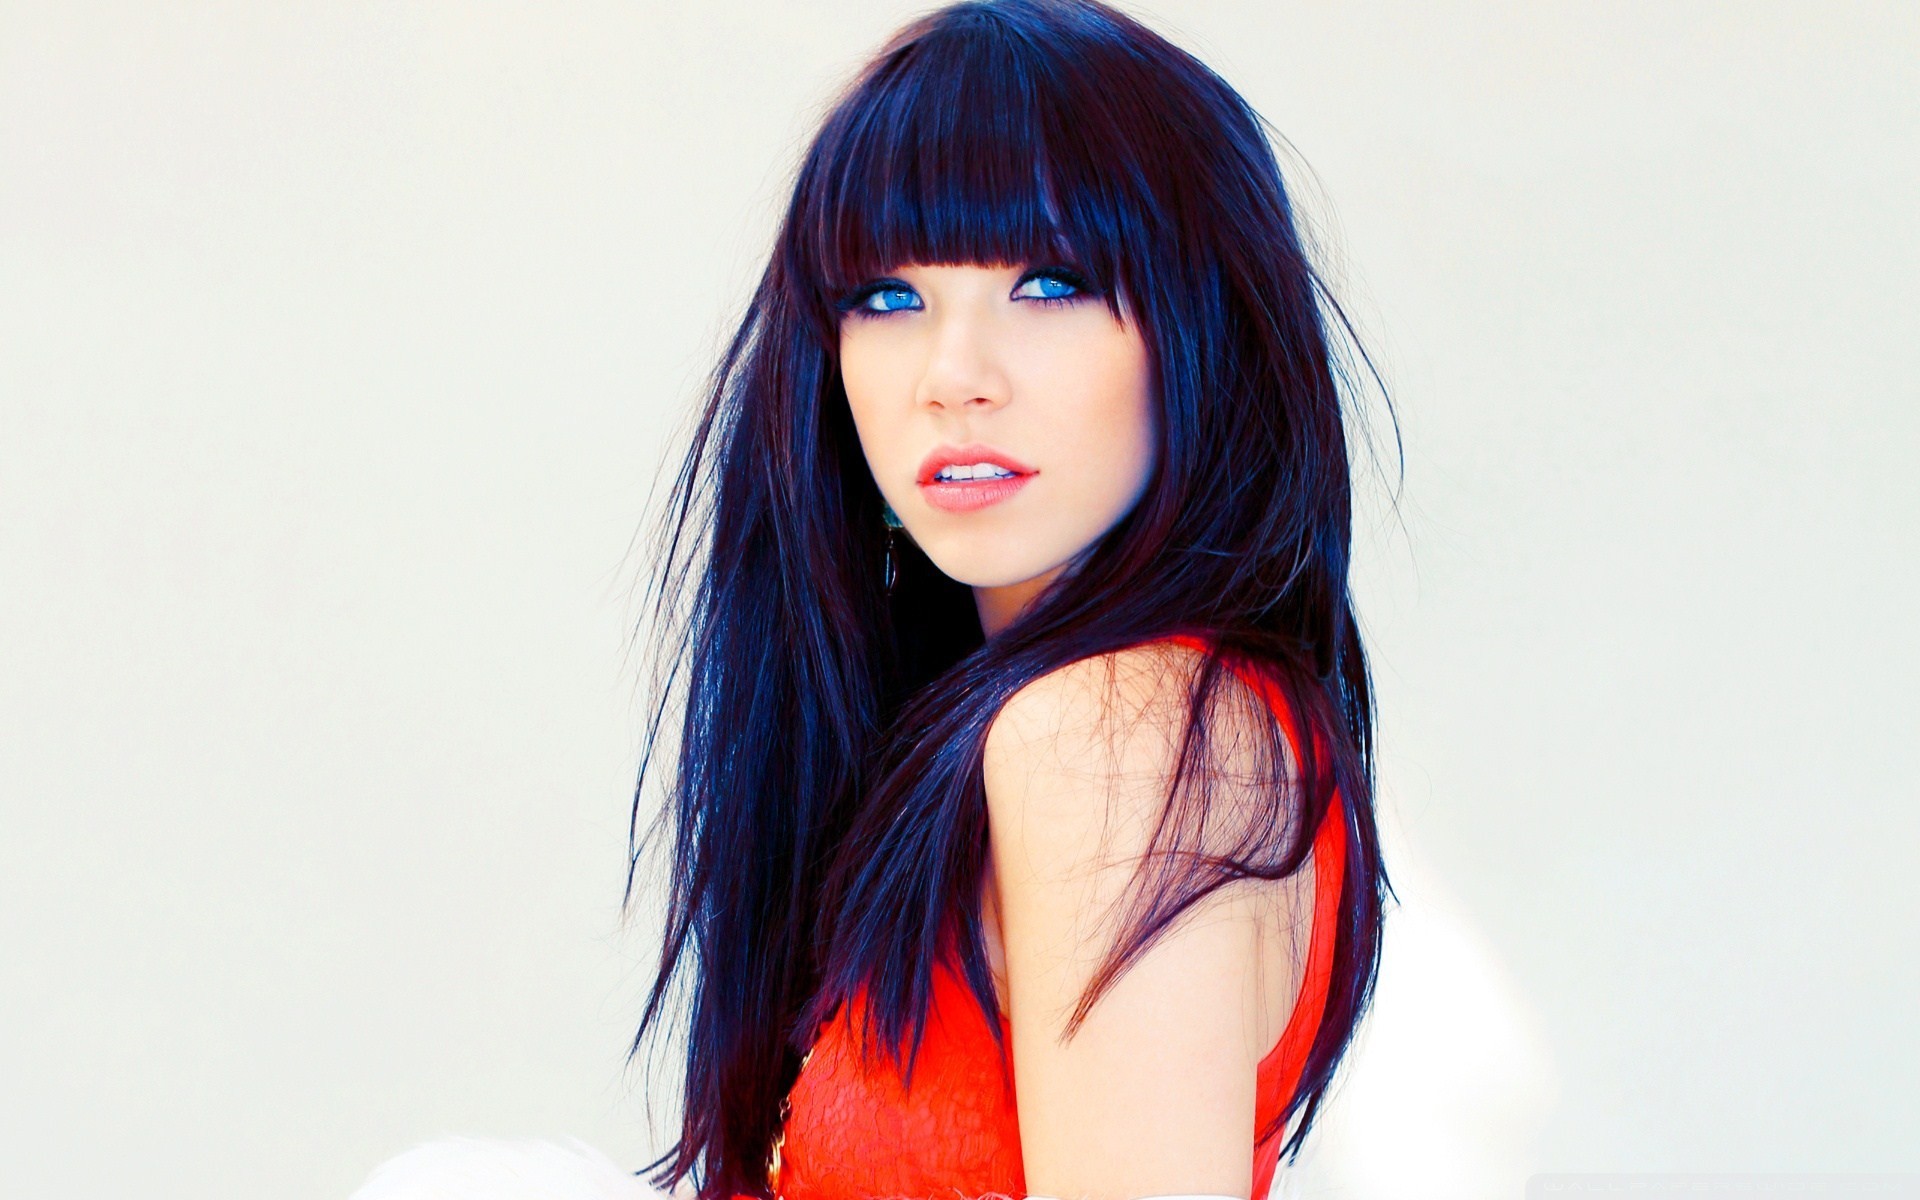 Carly Rae Jepsen photo gallery - 211 high quality pics of Carly Rae Jepsen | ThePlace